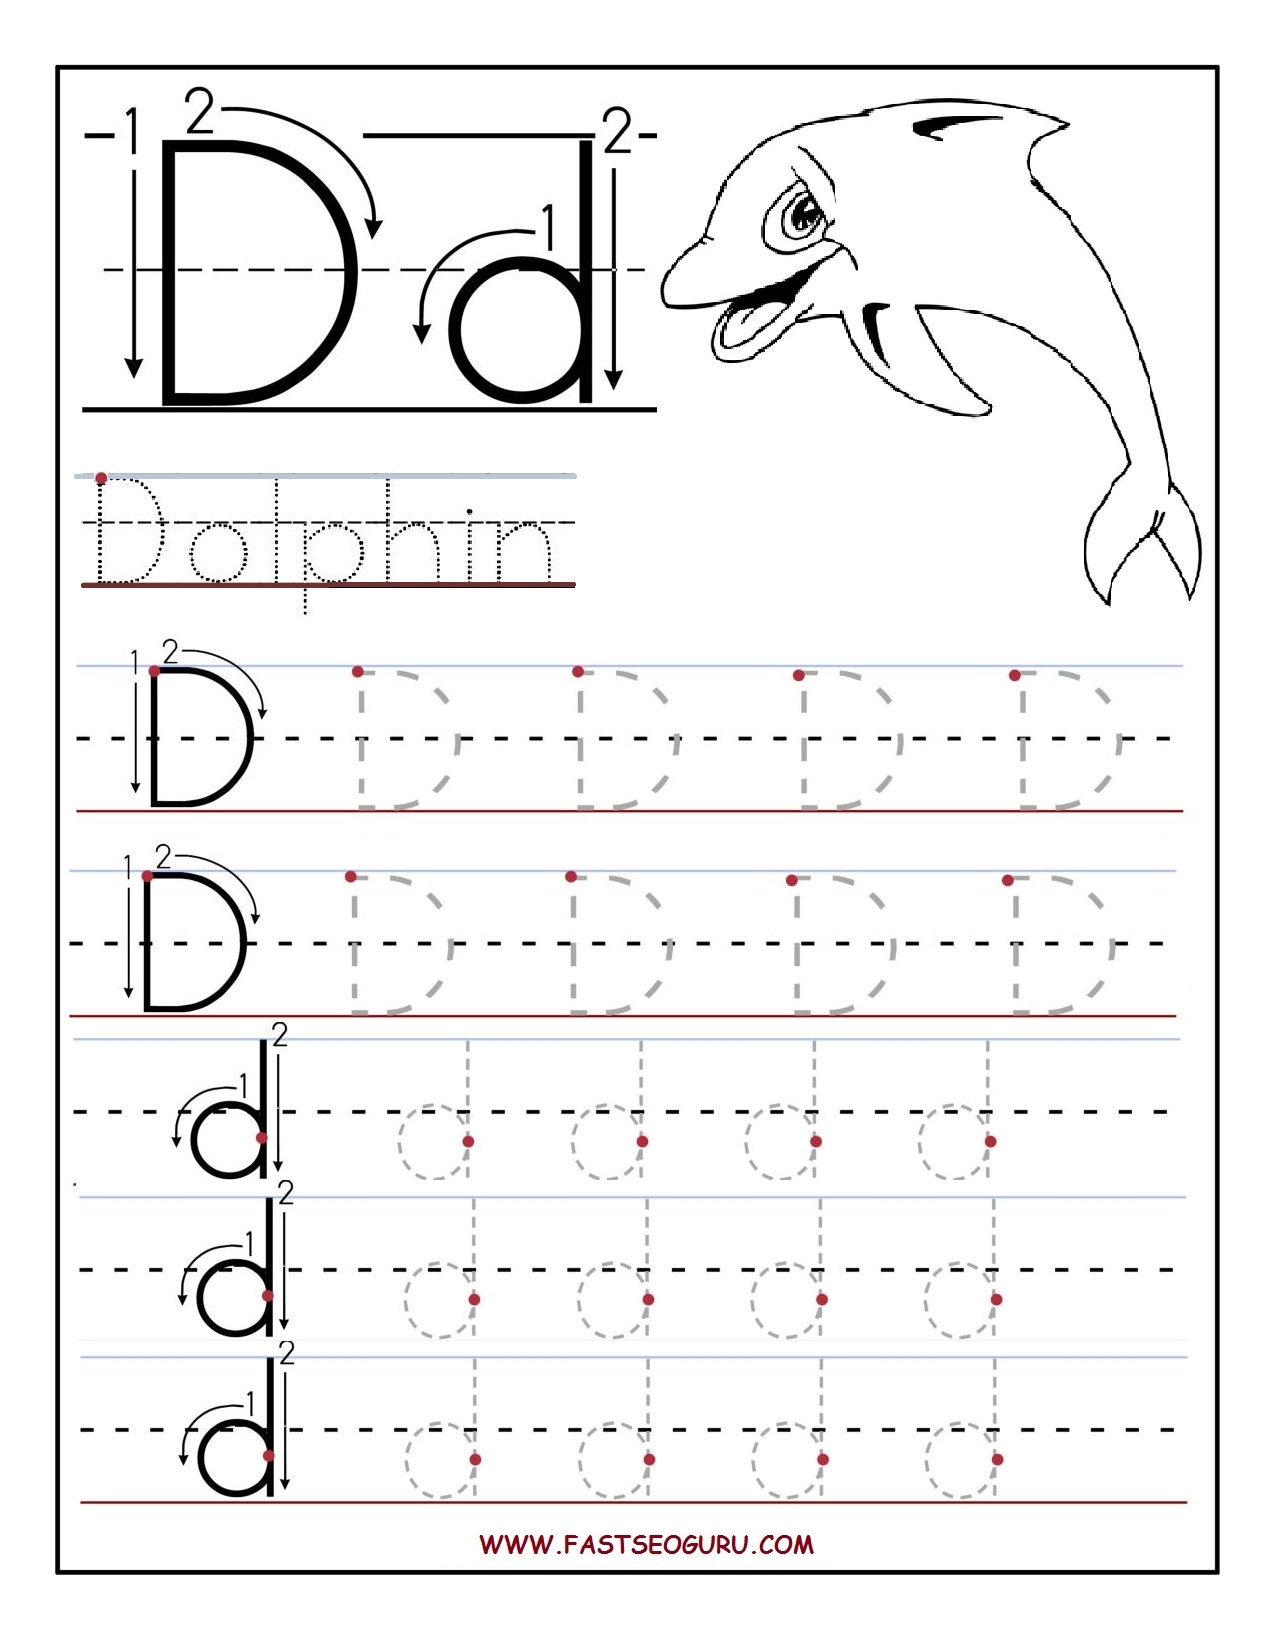 Printable Letter D Tracing Worksheets For Preschool with regard to Letter D Tracing Sheet